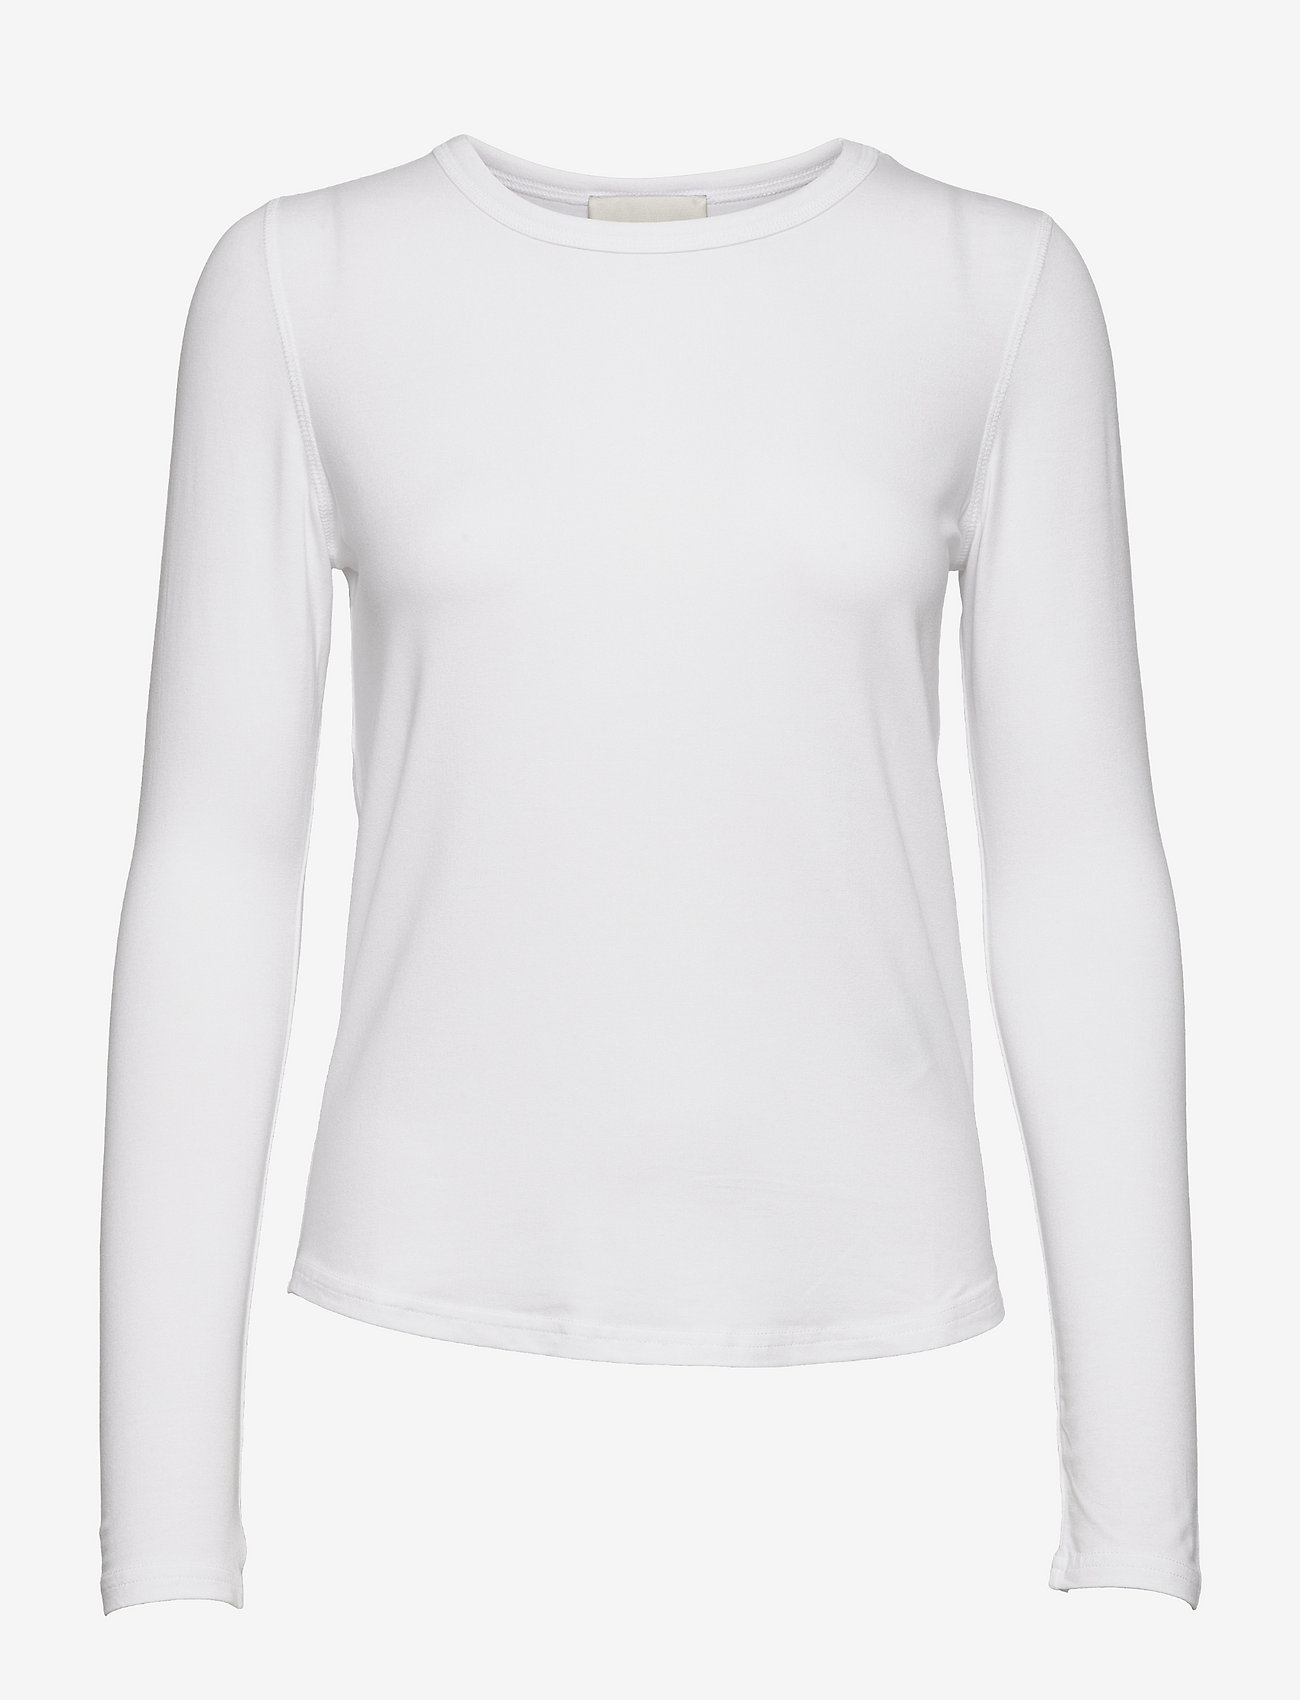 My Essential Wardrobe - 18 THE MODAL BLOUSE - t-shirt & tops - bright white - 0